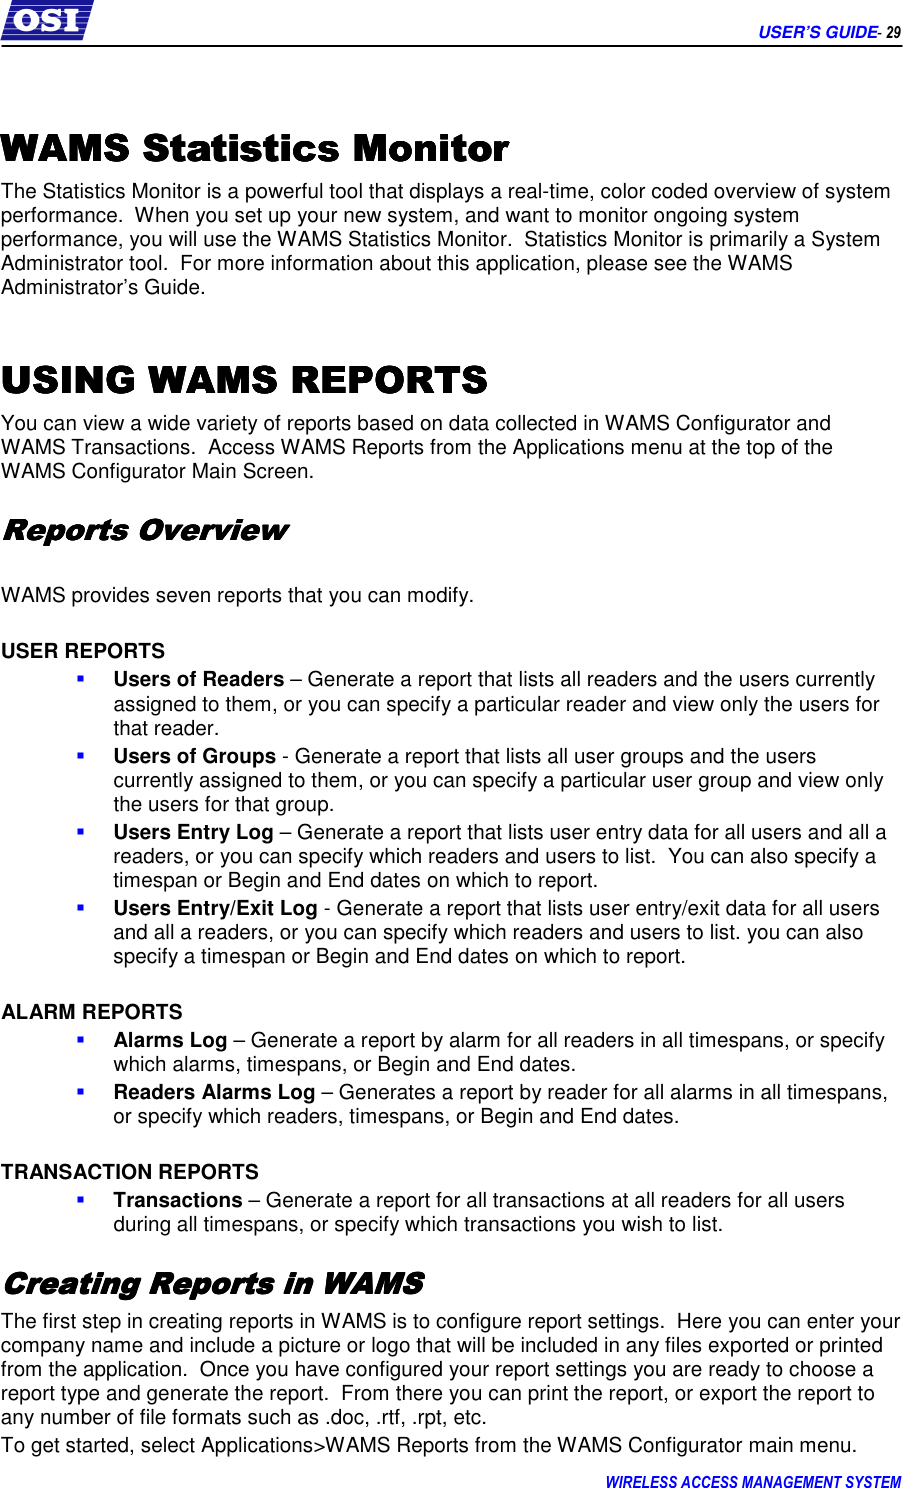      USER’S GUIDE- 29 WIRELESS ACCESS MANAGEMENT SYSTEM   WAMS Statistics MonitorWAMS Statistics MonitorWAMS Statistics MonitorWAMS Statistics Monitor    The Statistics Monitor is a powerful tool that displays a real-time, color coded overview of system performance.  When you set up your new system, and want to monitor ongoing system performance, you will use the WAMS Statistics Monitor.  Statistics Monitor is primarily a System Administrator tool.  For more information about this application, please see the WAMS Administrator’s Guide.  USING WAMS REPORTSUSING WAMS REPORTSUSING WAMS REPORTSUSING WAMS REPORTS    You can view a wide variety of reports based on data collected in WAMS Configurator and WAMS Transactions.  Access WAMS Reports from the Applications menu at the top of the WAMS Configurator Main Screen. Reports OverviewReports OverviewReports OverviewReports Overview     WAMS provides seven reports that you can modify.  USER REPORTS  Users of Readers – Generate a report that lists all readers and the users currently assigned to them, or you can specify a particular reader and view only the users for that reader.  Users of Groups - Generate a report that lists all user groups and the users currently assigned to them, or you can specify a particular user group and view only the users for that group.  Users Entry Log – Generate a report that lists user entry data for all users and all a readers, or you can specify which readers and users to list.  You can also specify a timespan or Begin and End dates on which to report.  Users Entry/Exit Log - Generate a report that lists user entry/exit data for all users and all a readers, or you can specify which readers and users to list. you can also specify a timespan or Begin and End dates on which to report.  ALARM REPORTS  Alarms Log – Generate a report by alarm for all readers in all timespans, or specify which alarms, timespans, or Begin and End dates.  Readers Alarms Log – Generates a report by reader for all alarms in all timespans, or specify which readers, timespans, or Begin and End dates.  TRANSACTION REPORTS  Transactions – Generate a report for all transactions at all readers for all users during all timespans, or specify which transactions you wish to list. Creating Reports in WAMSCreating Reports in WAMSCreating Reports in WAMSCreating Reports in WAMS    The first step in creating reports in WAMS is to configure report settings.  Here you can enter your company name and include a picture or logo that will be included in any files exported or printed from the application.  Once you have configured your report settings you are ready to choose a report type and generate the report.  From there you can print the report, or export the report to any number of file formats such as .doc, .rtf, .rpt, etc. To get started, select Applications&gt;WAMS Reports from the WAMS Configurator main menu. 